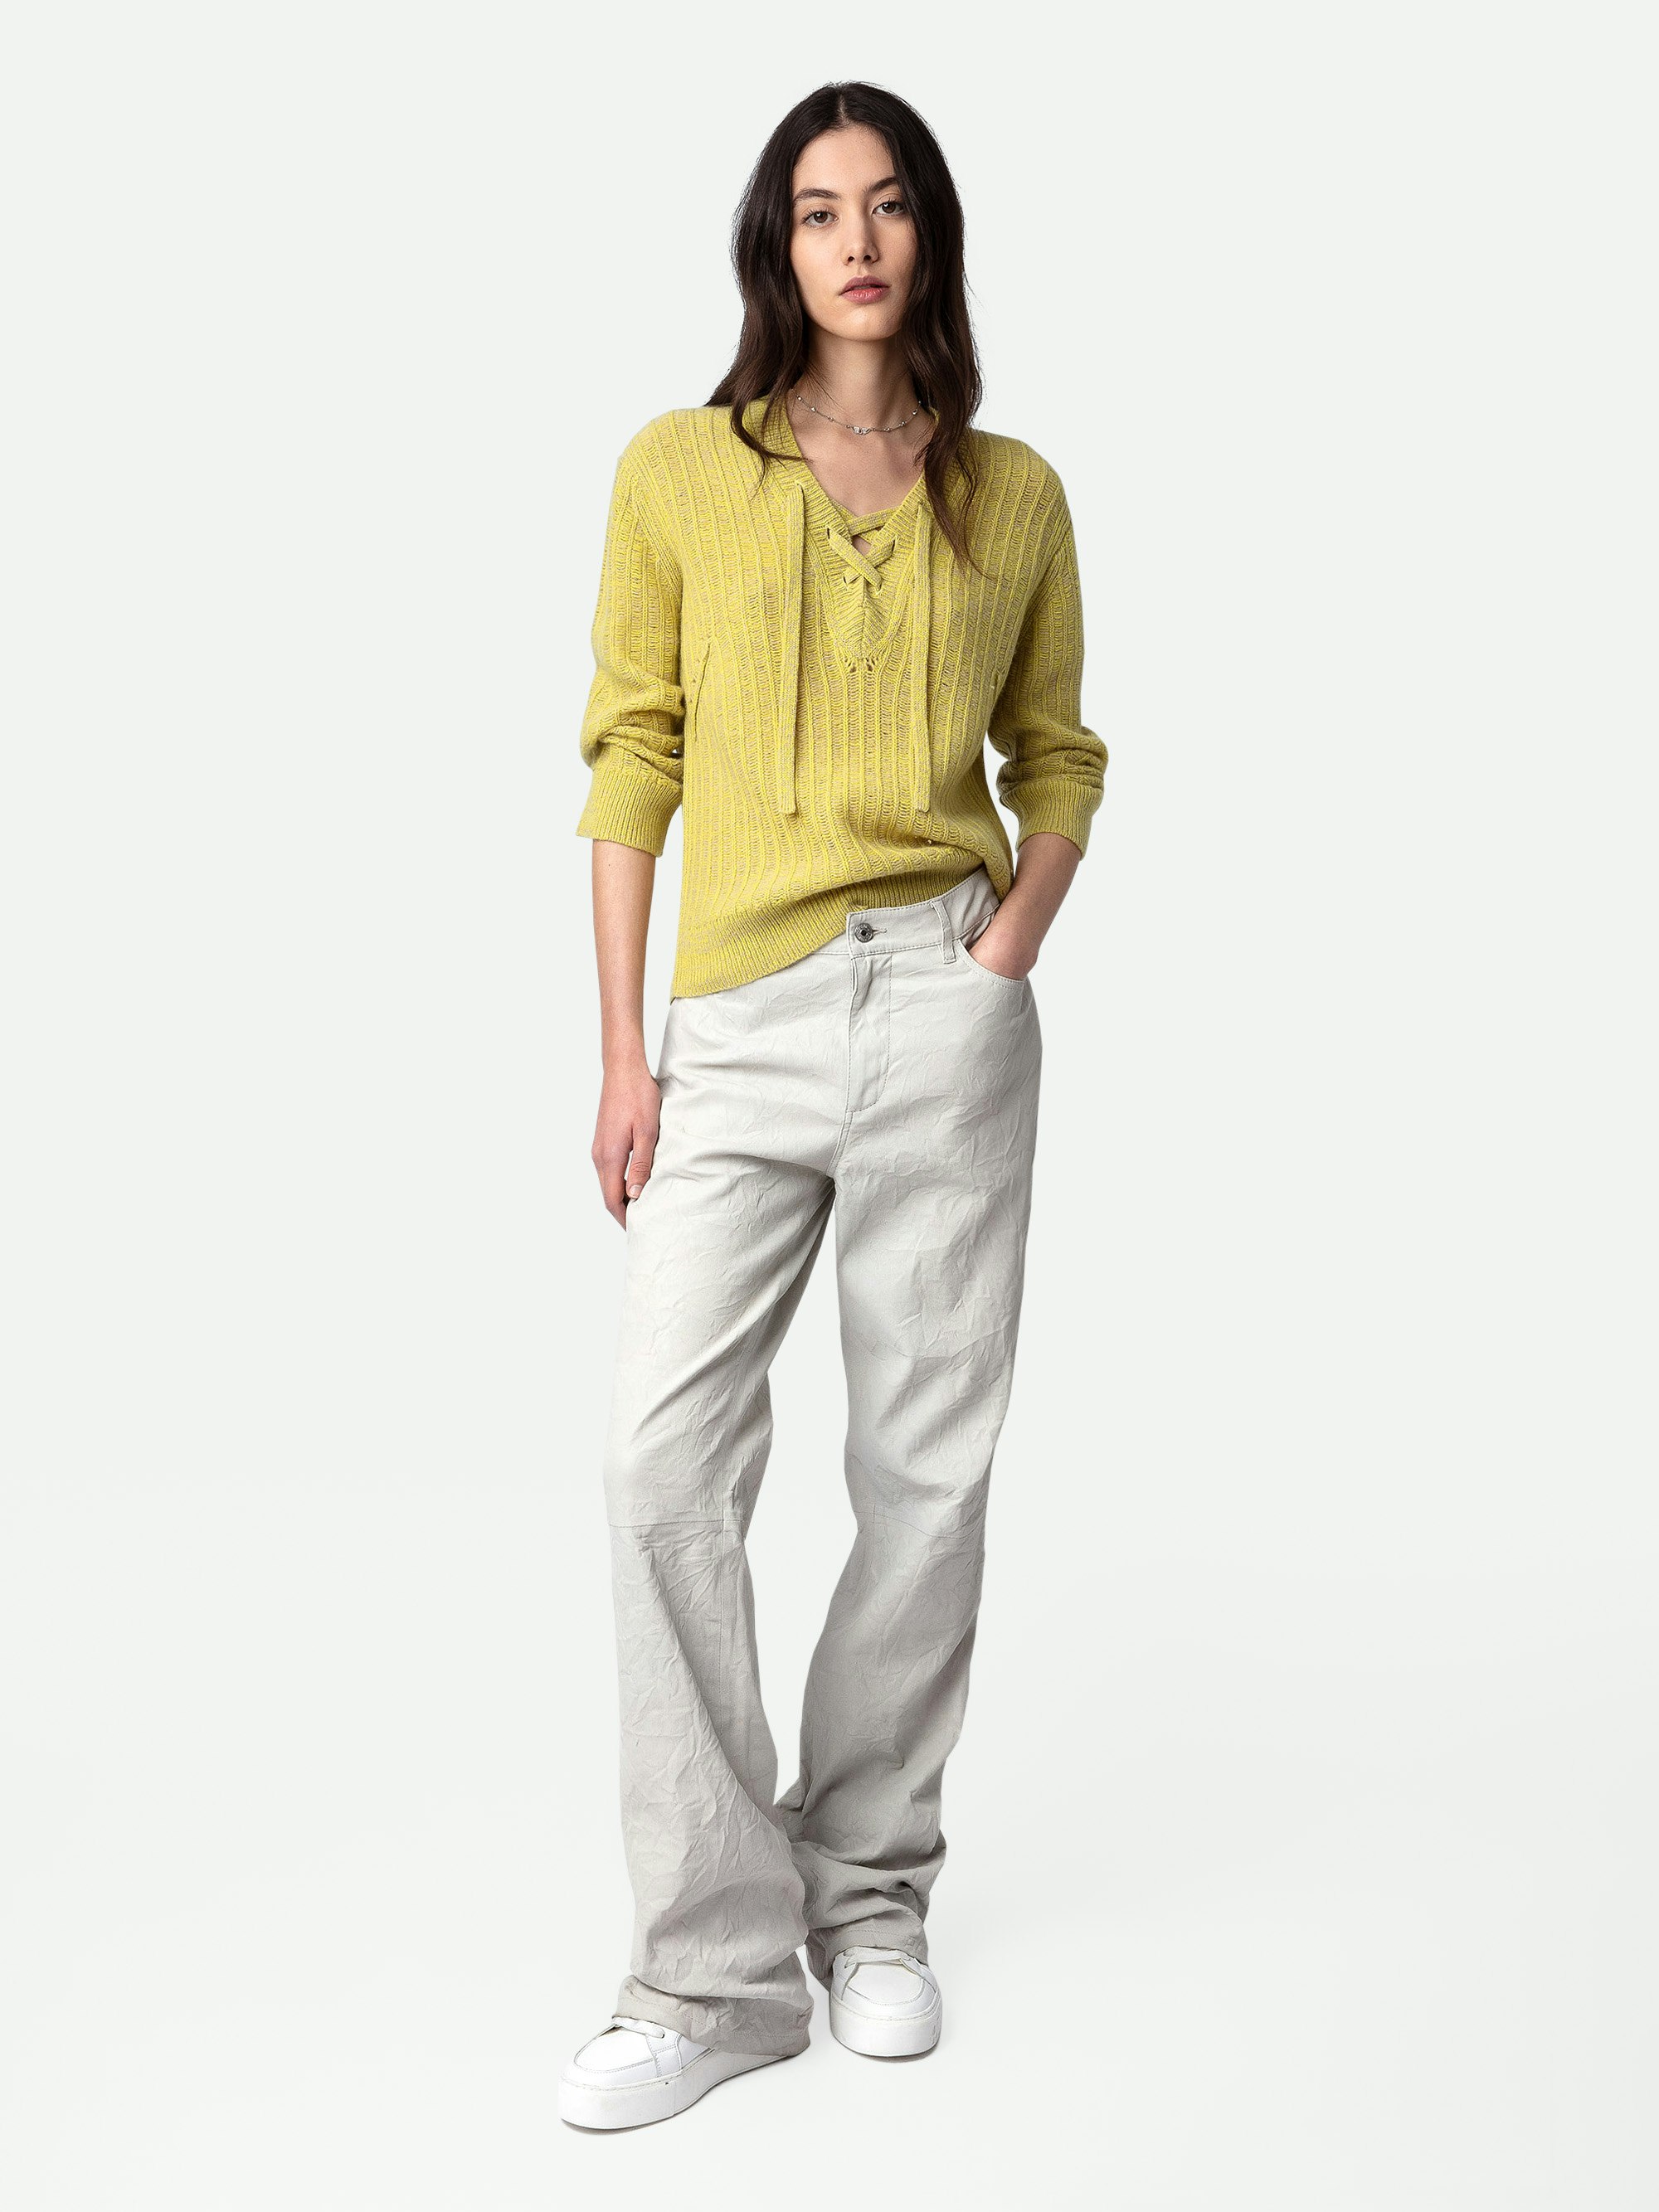 Fanny Sweater - Light yellow merino wool sweater with openwork details, long sleeves and drawstring ties.